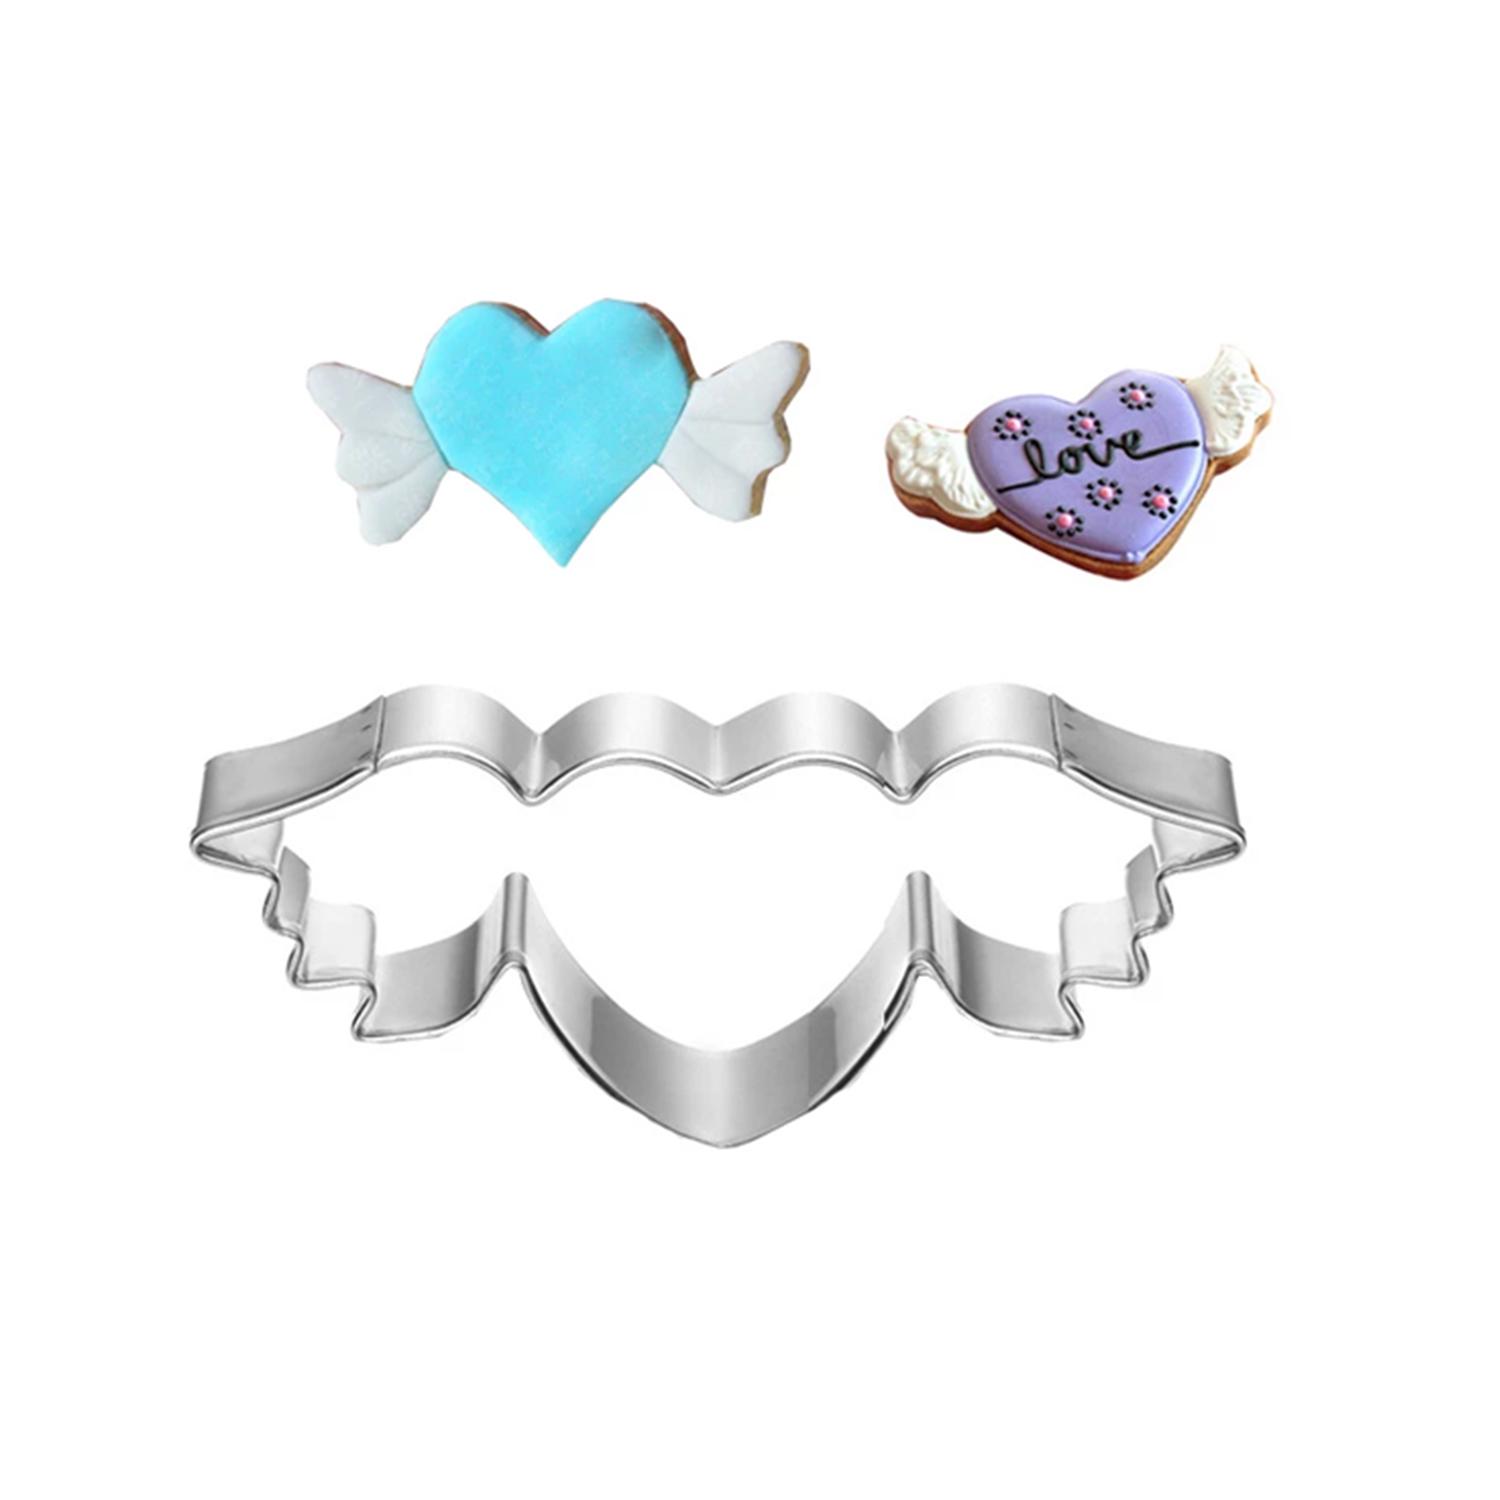 STAINLESS STEEL WINGED HEART CUTTER